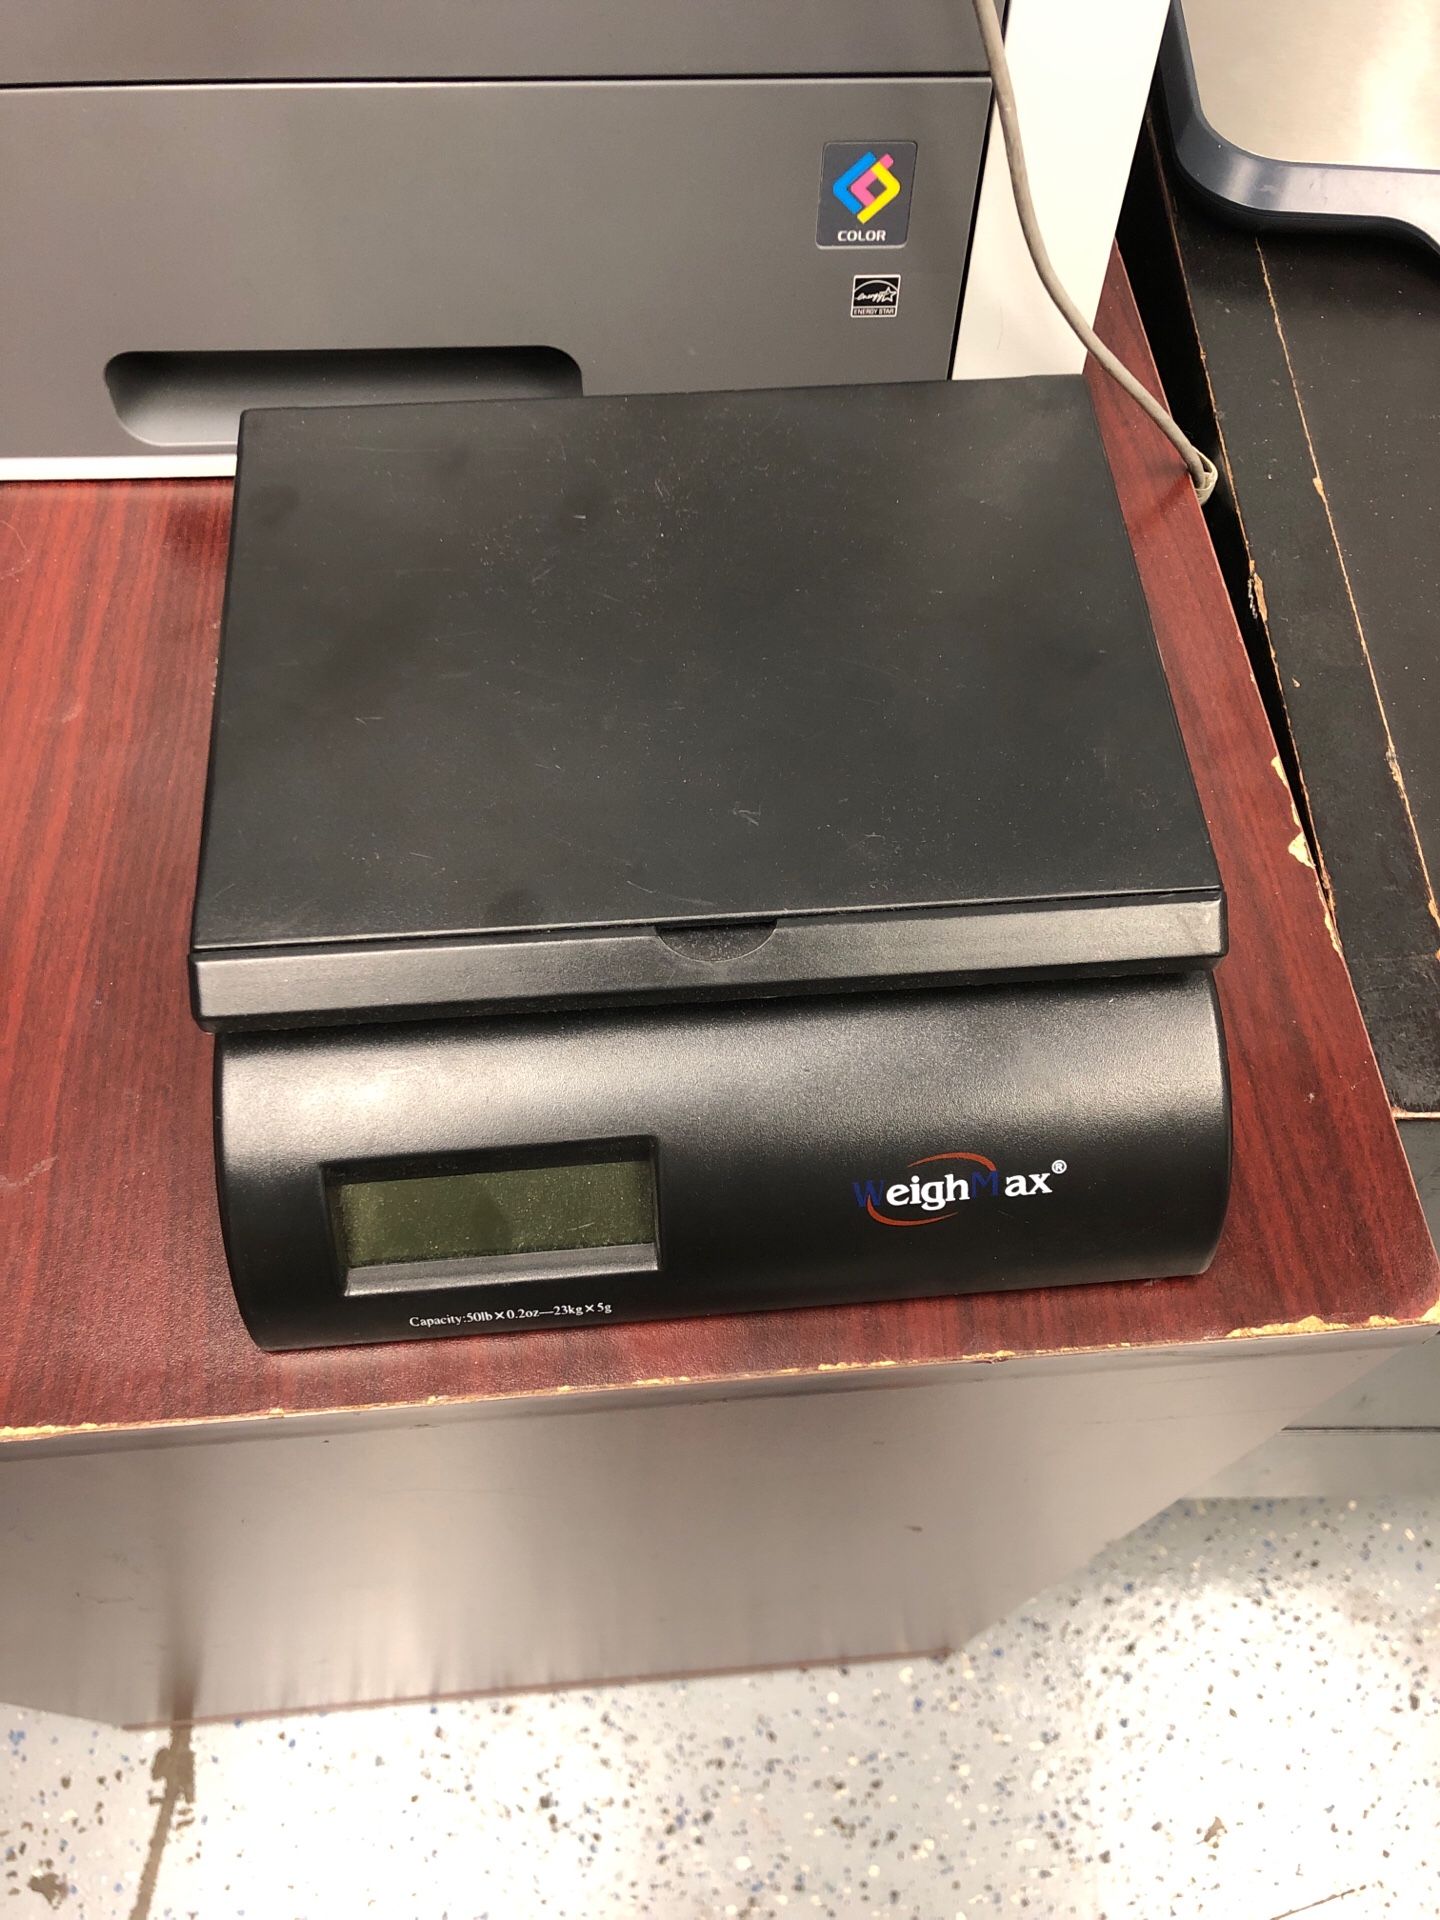 Weigh max postal scale like new comes with cord/wall plug